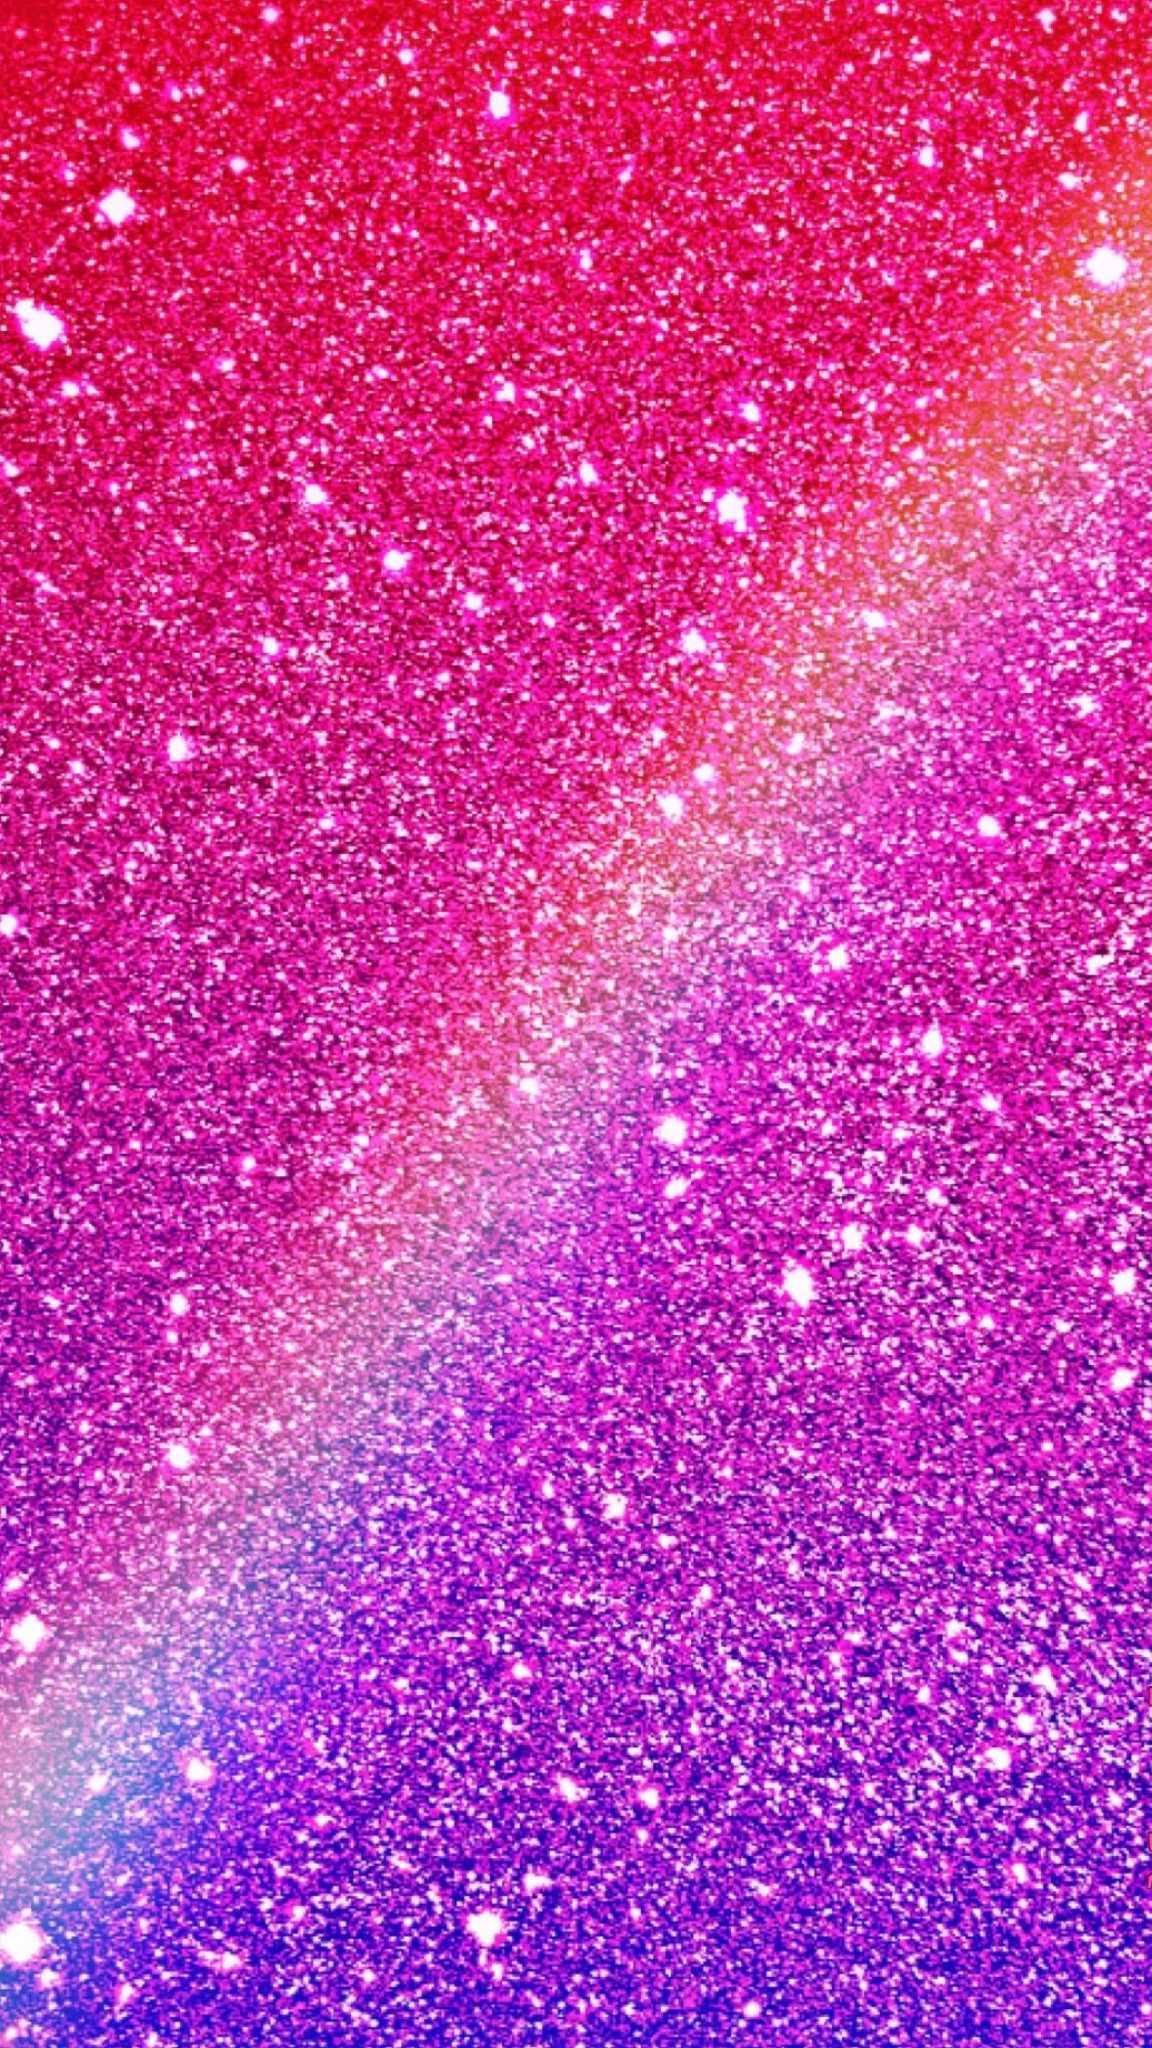 Sparkle: Glitter, Used to make snowflakes, stars, hearts, and other holiday decorations. 1160x2050 HD Background.